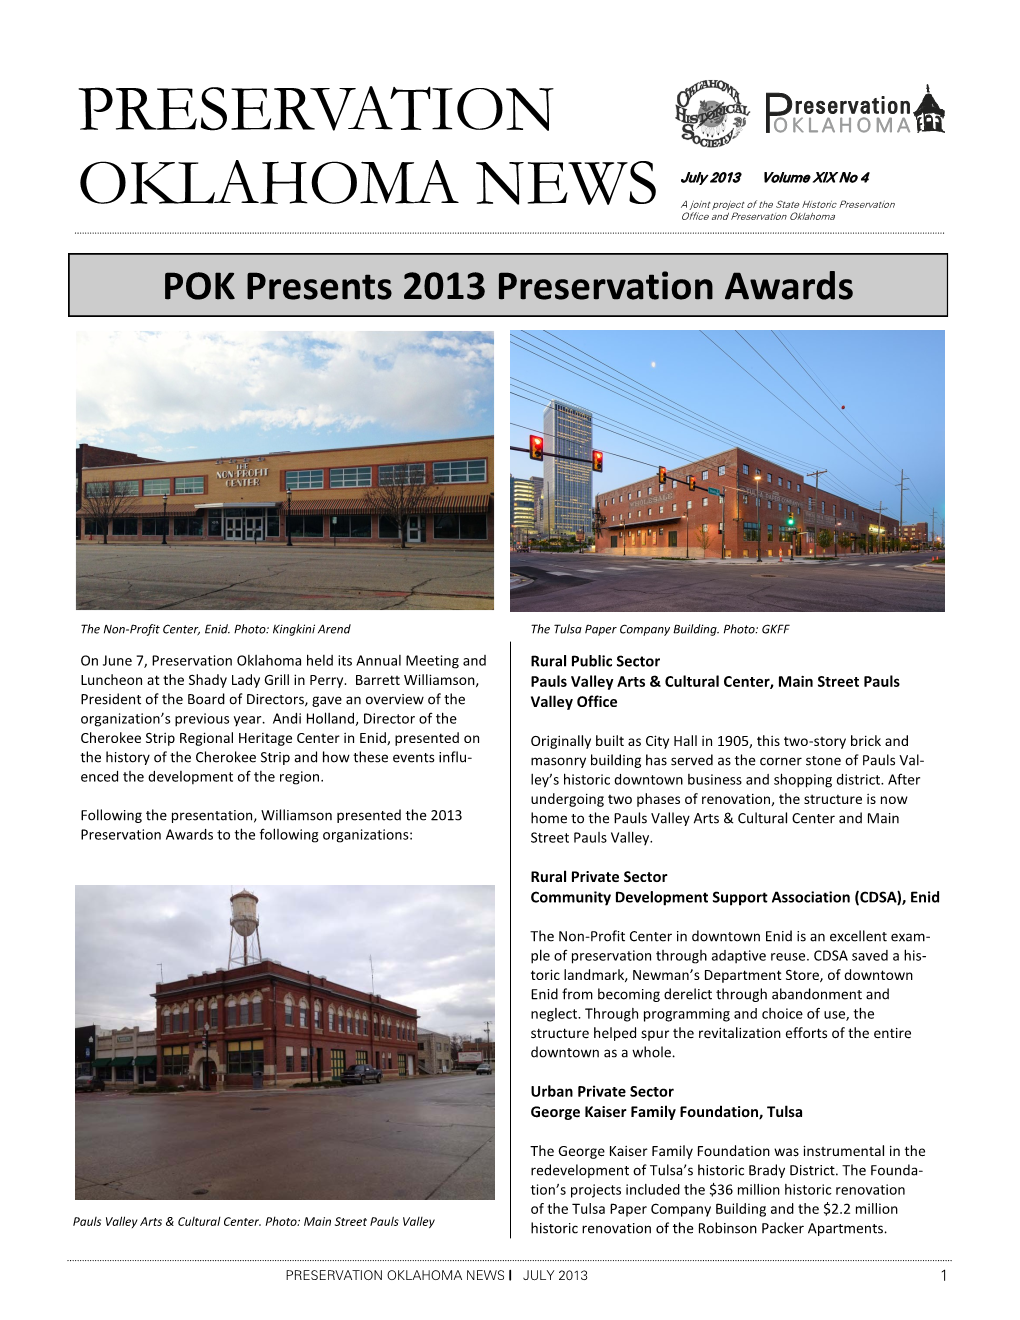 PRESERVATION OKLAHOMA NEWS L JULY 2013 1 Oklahoma’S Most Endangered Historic Places Announced